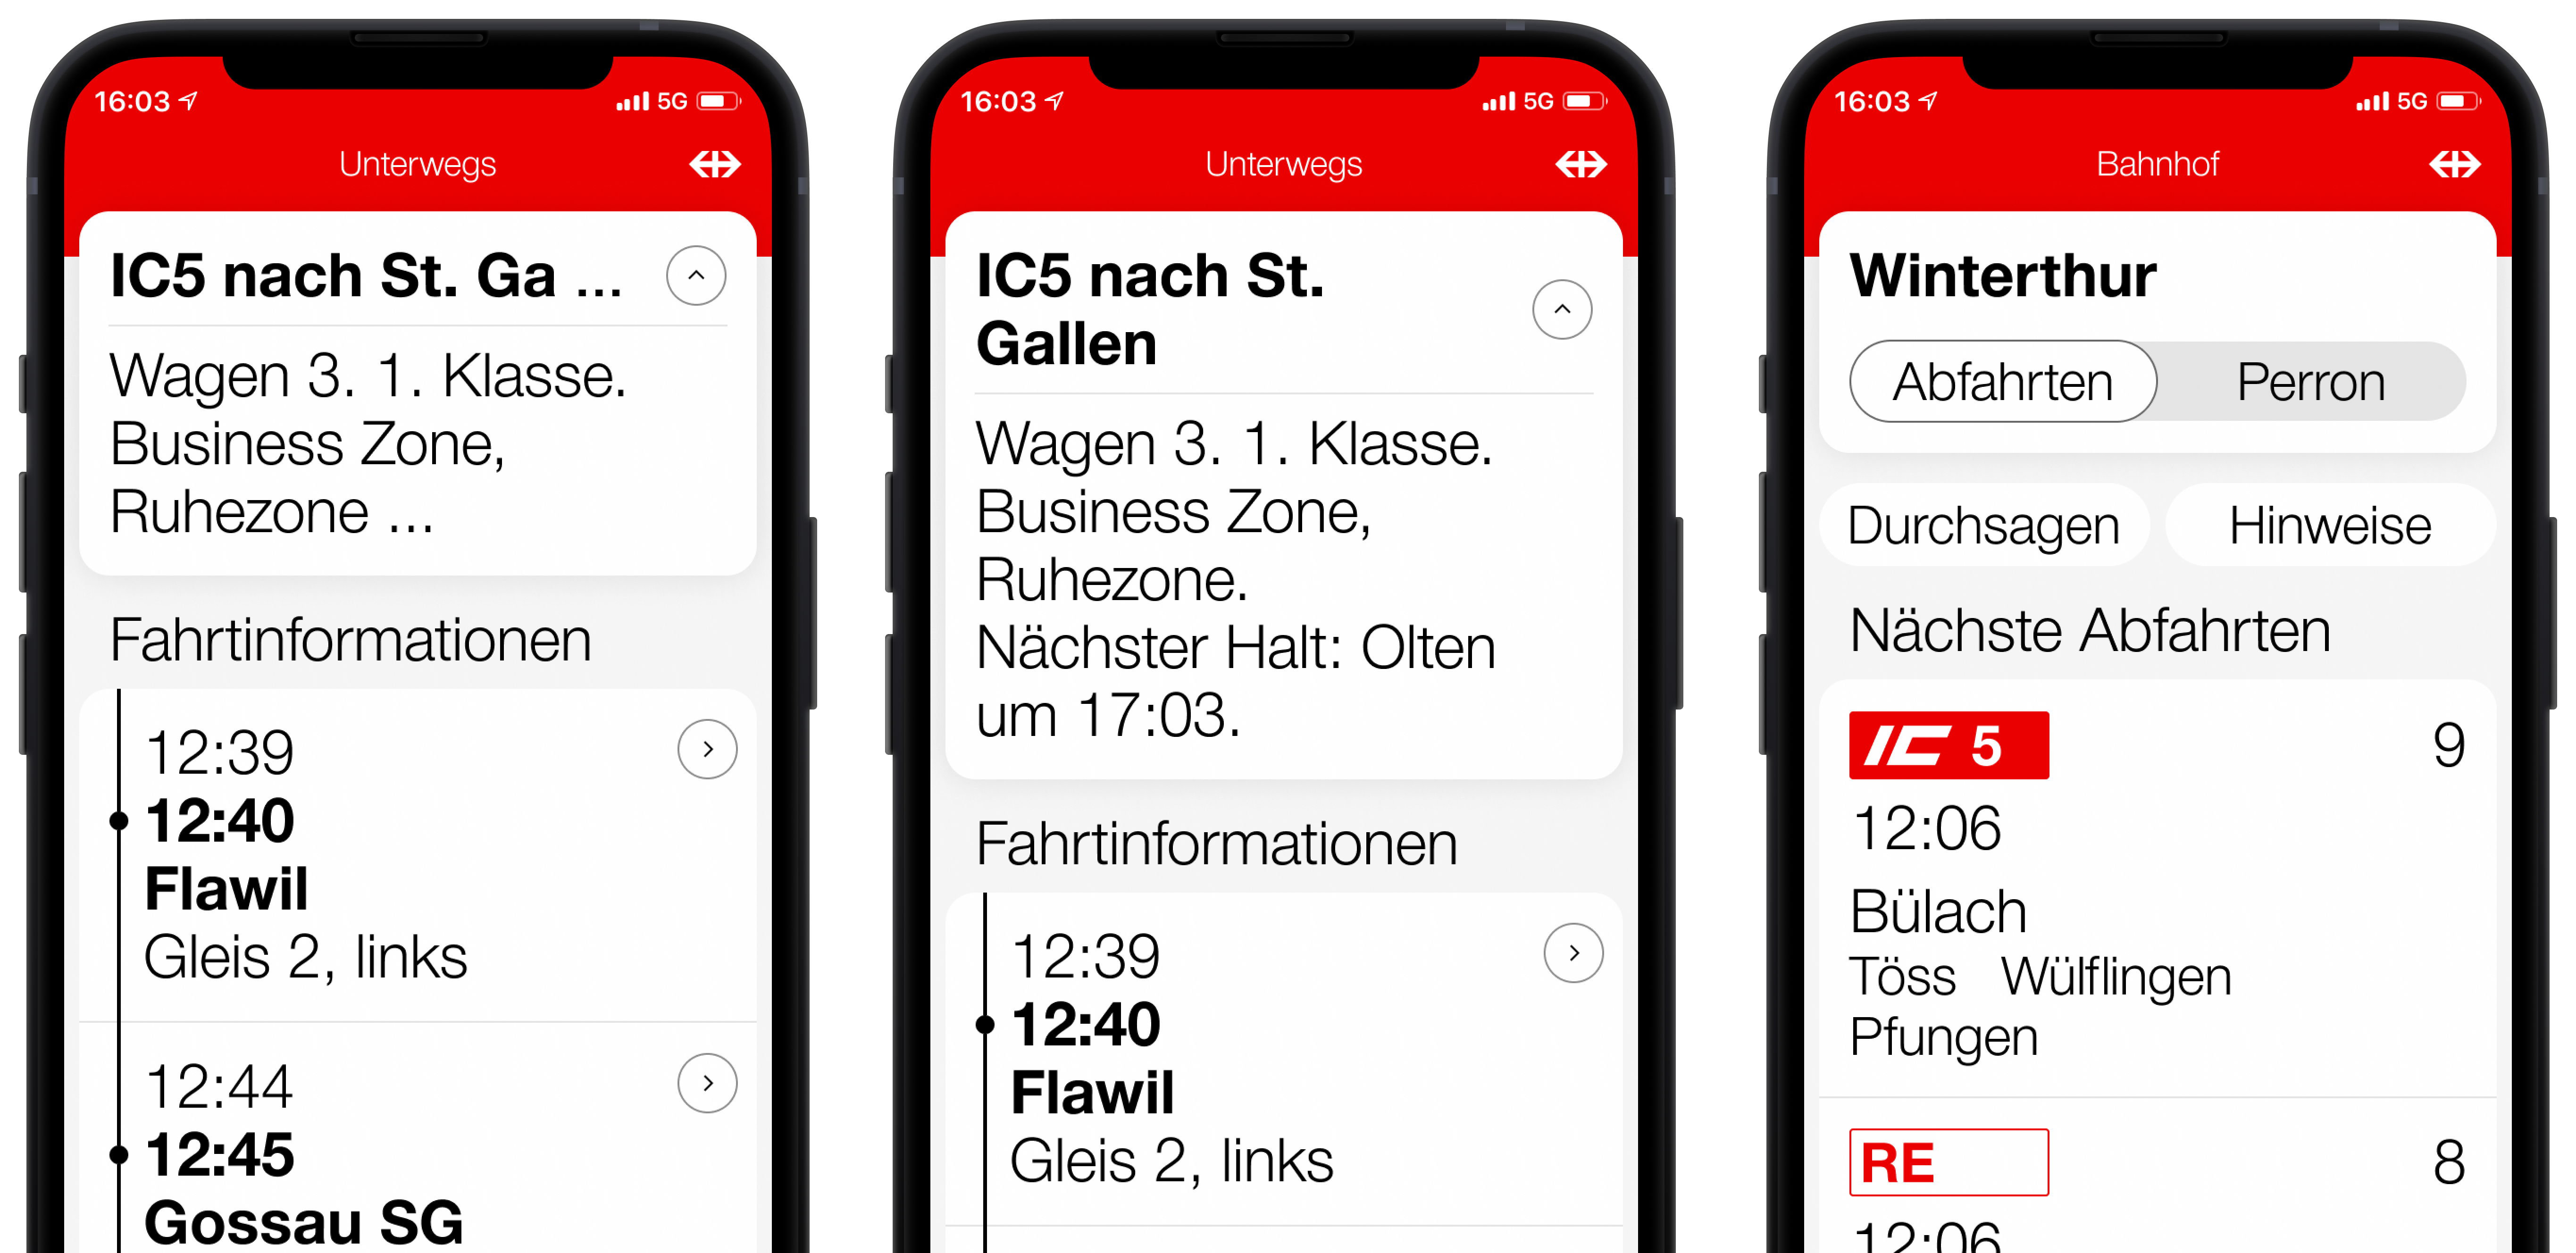 The image shows three mobile phone screens of SBB Inclusive. The first two screens show the view in the ‘Unterwegs’ (En route) tab. Text that is too long is truncated by three dots on the left of the screen. It is presented correctly in the second screen: the app permits multi-line text. The ‘Bahnhof’ (Station) tab is shown in the third image. The display of the text in the buttons is reduced so that the buttons are not truncated.